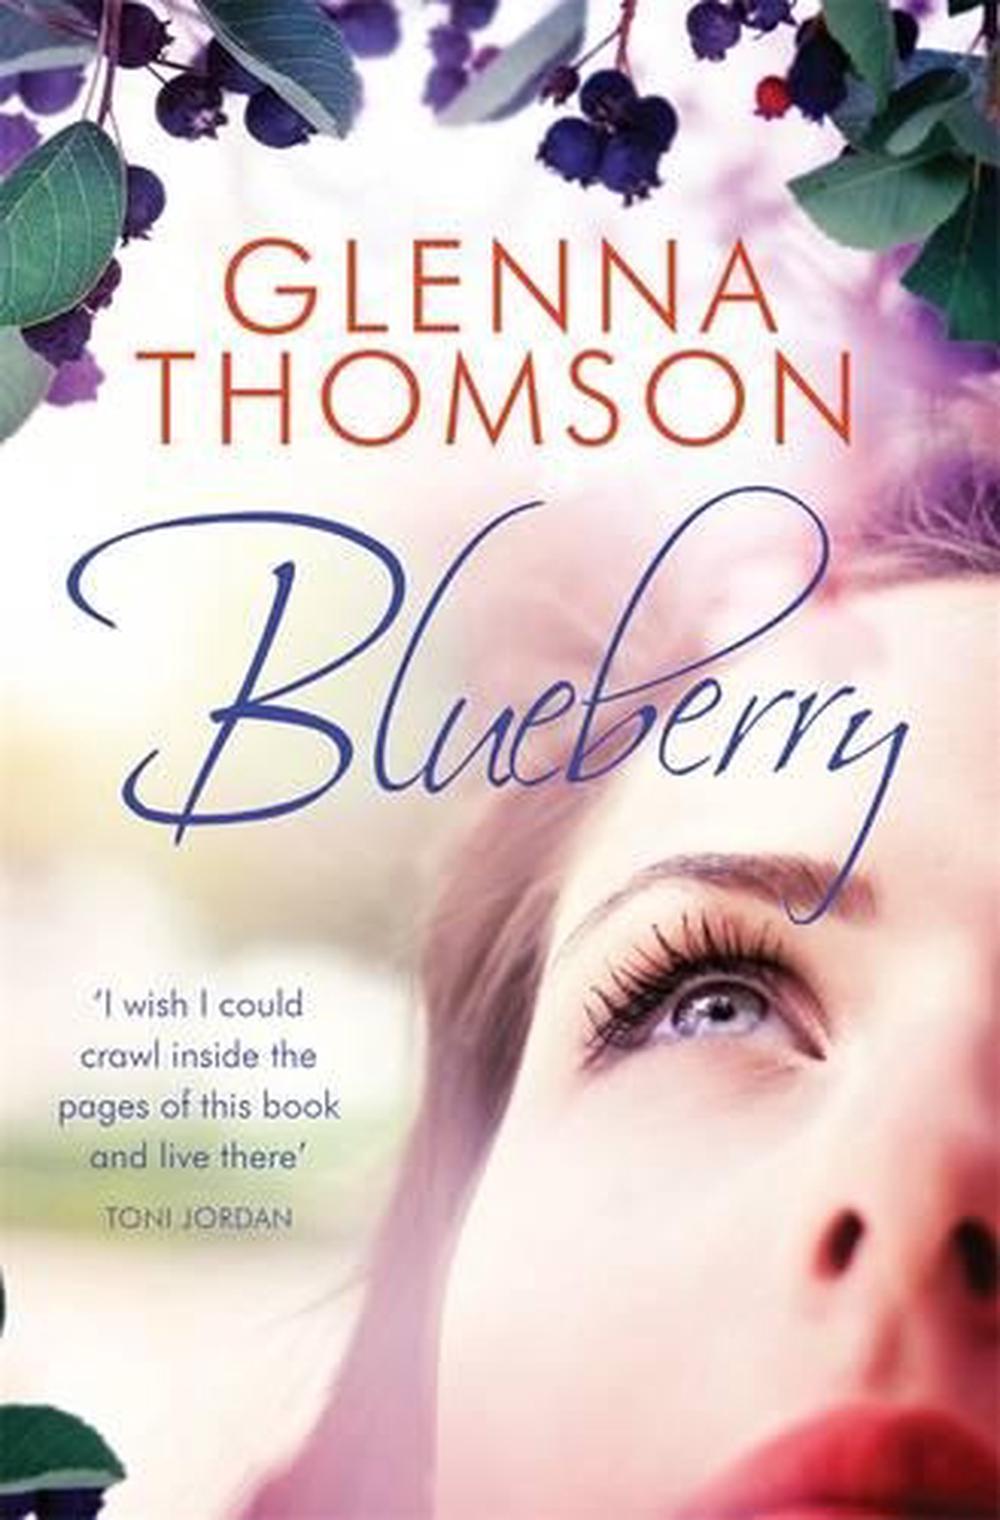 Blueberry by Glenna Thomson (English) Paperback Book Free Shipping